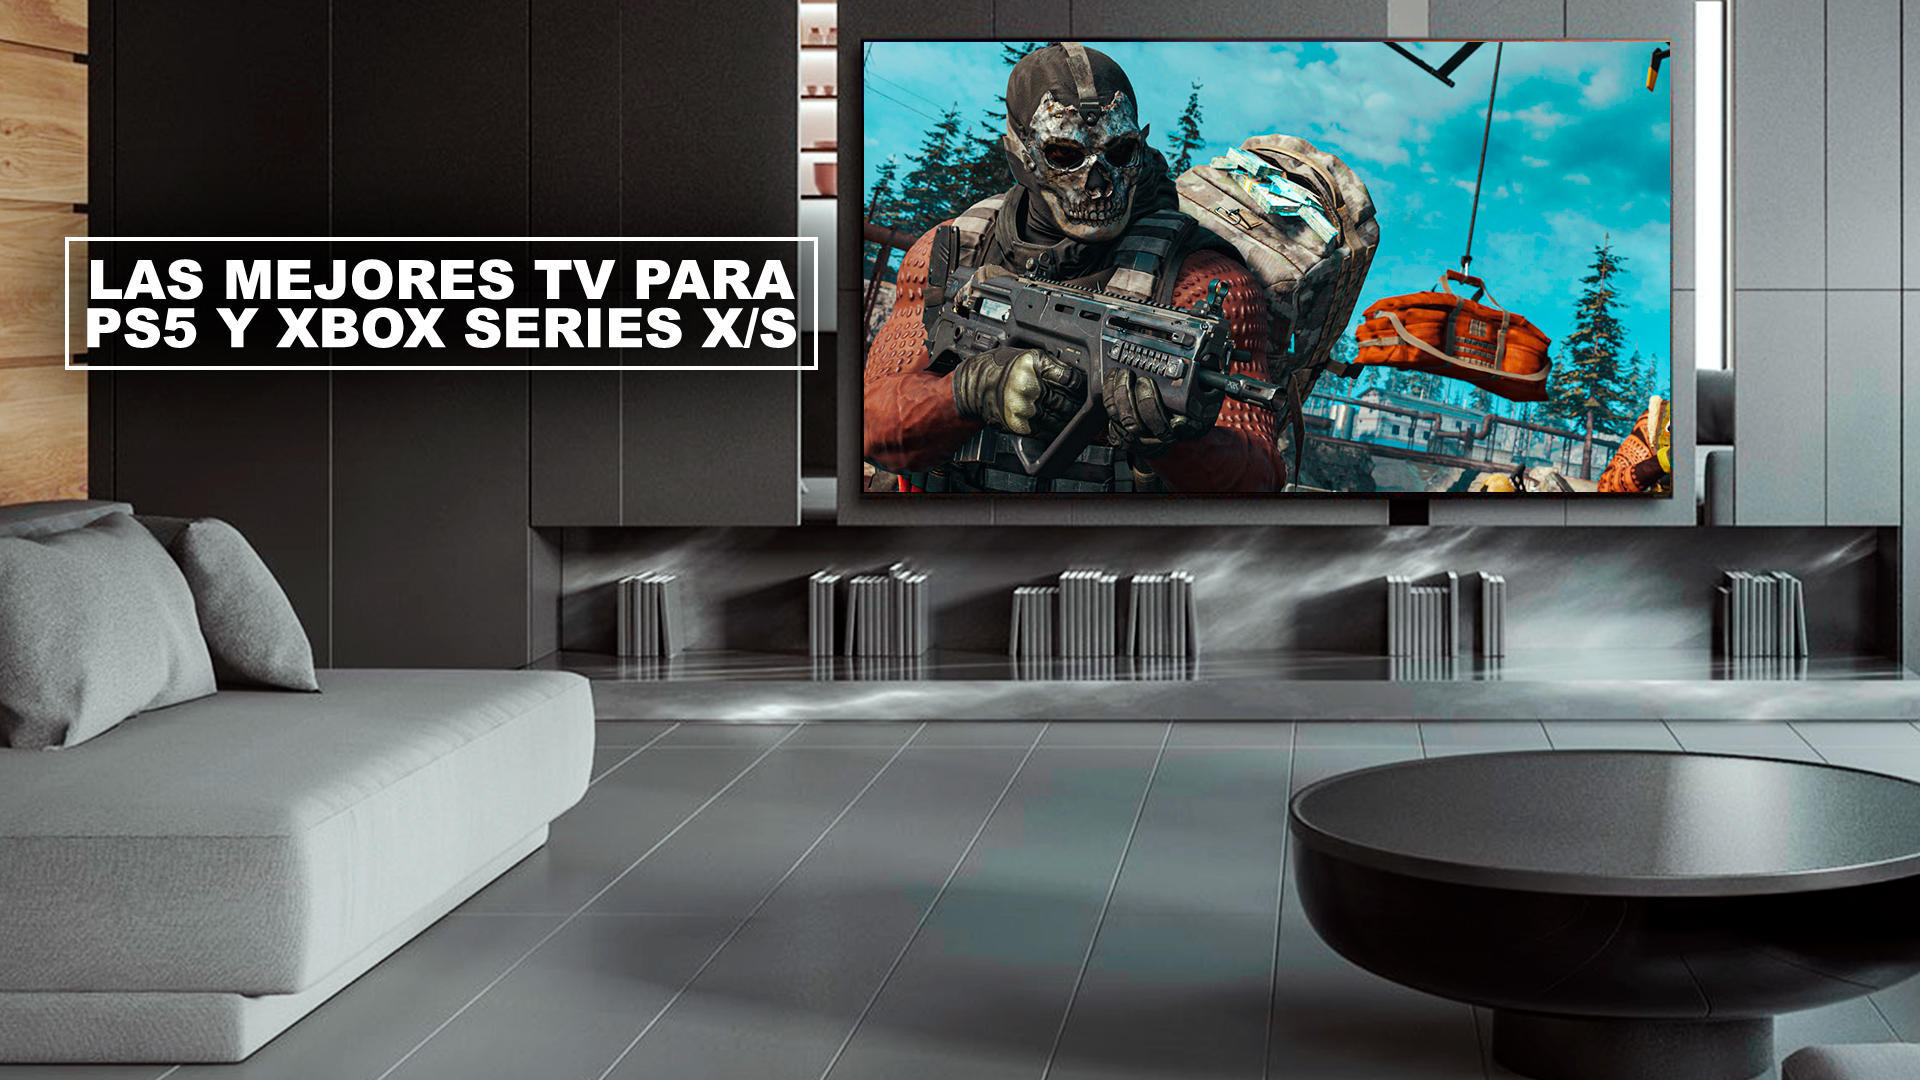 Mejores TV para PS5 y Xbox Series X/S (4K, 120fps, HDR, VRR...)